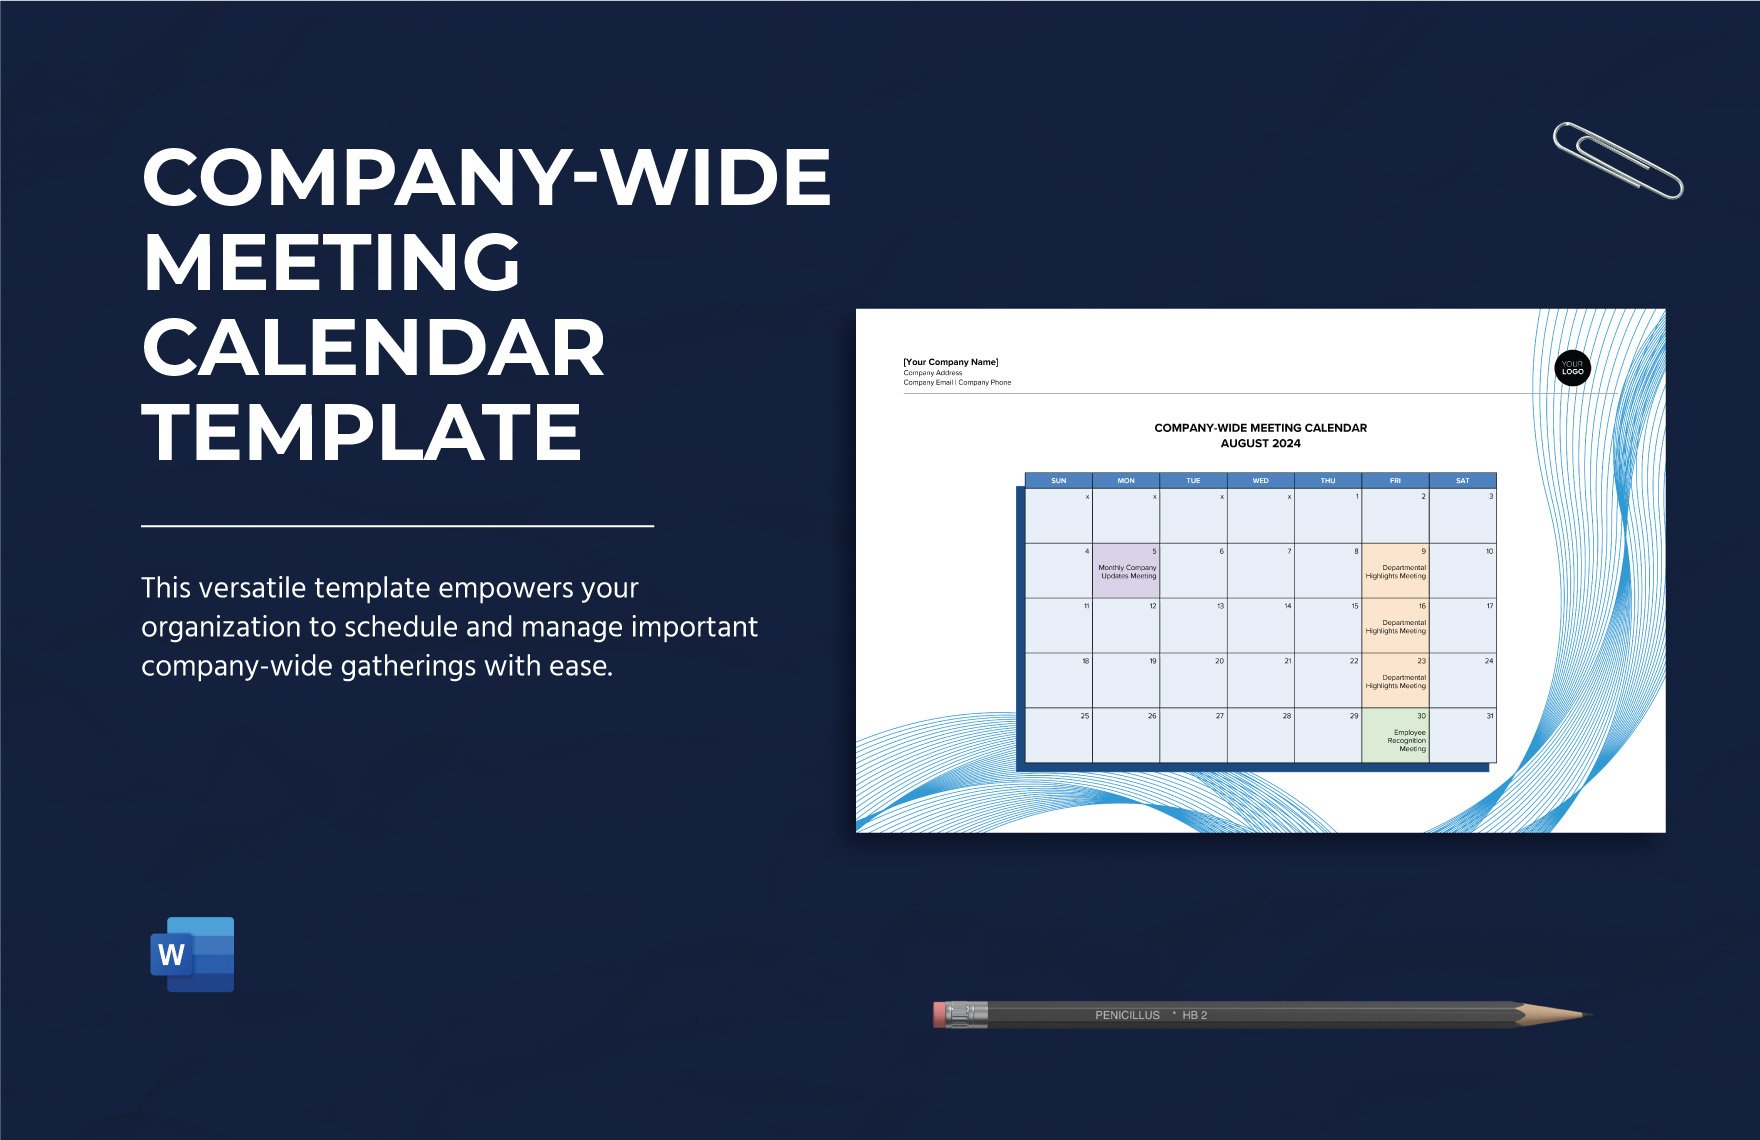 Company-Wide Meeting Calendar Template in Word